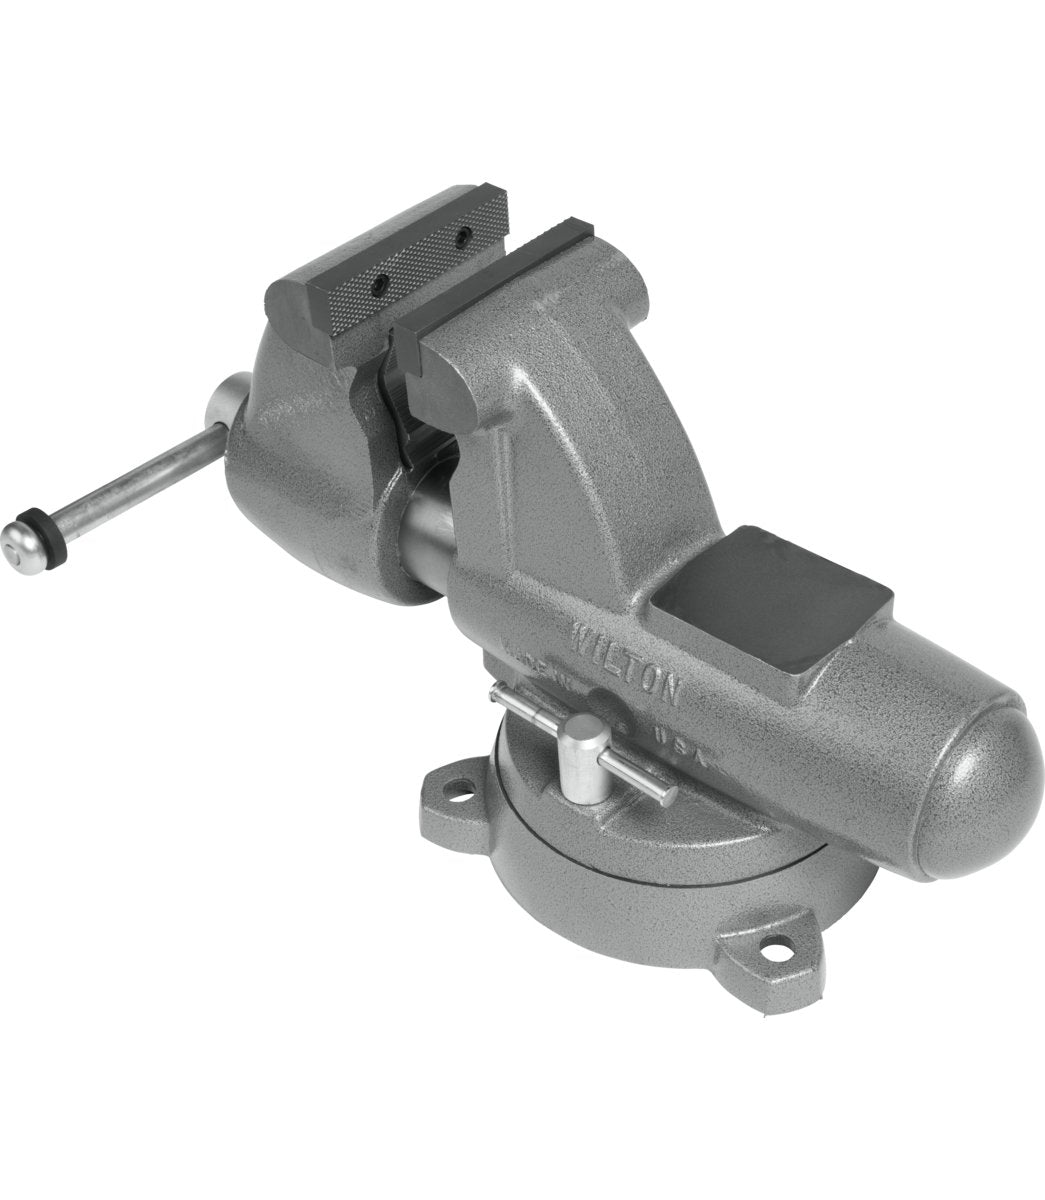 C-3 Pipe and Bench Vise, 6" Jaw Width, 9" Max Jaw Opening, 6-5/8" Throat Depth - Diamond Tool Store